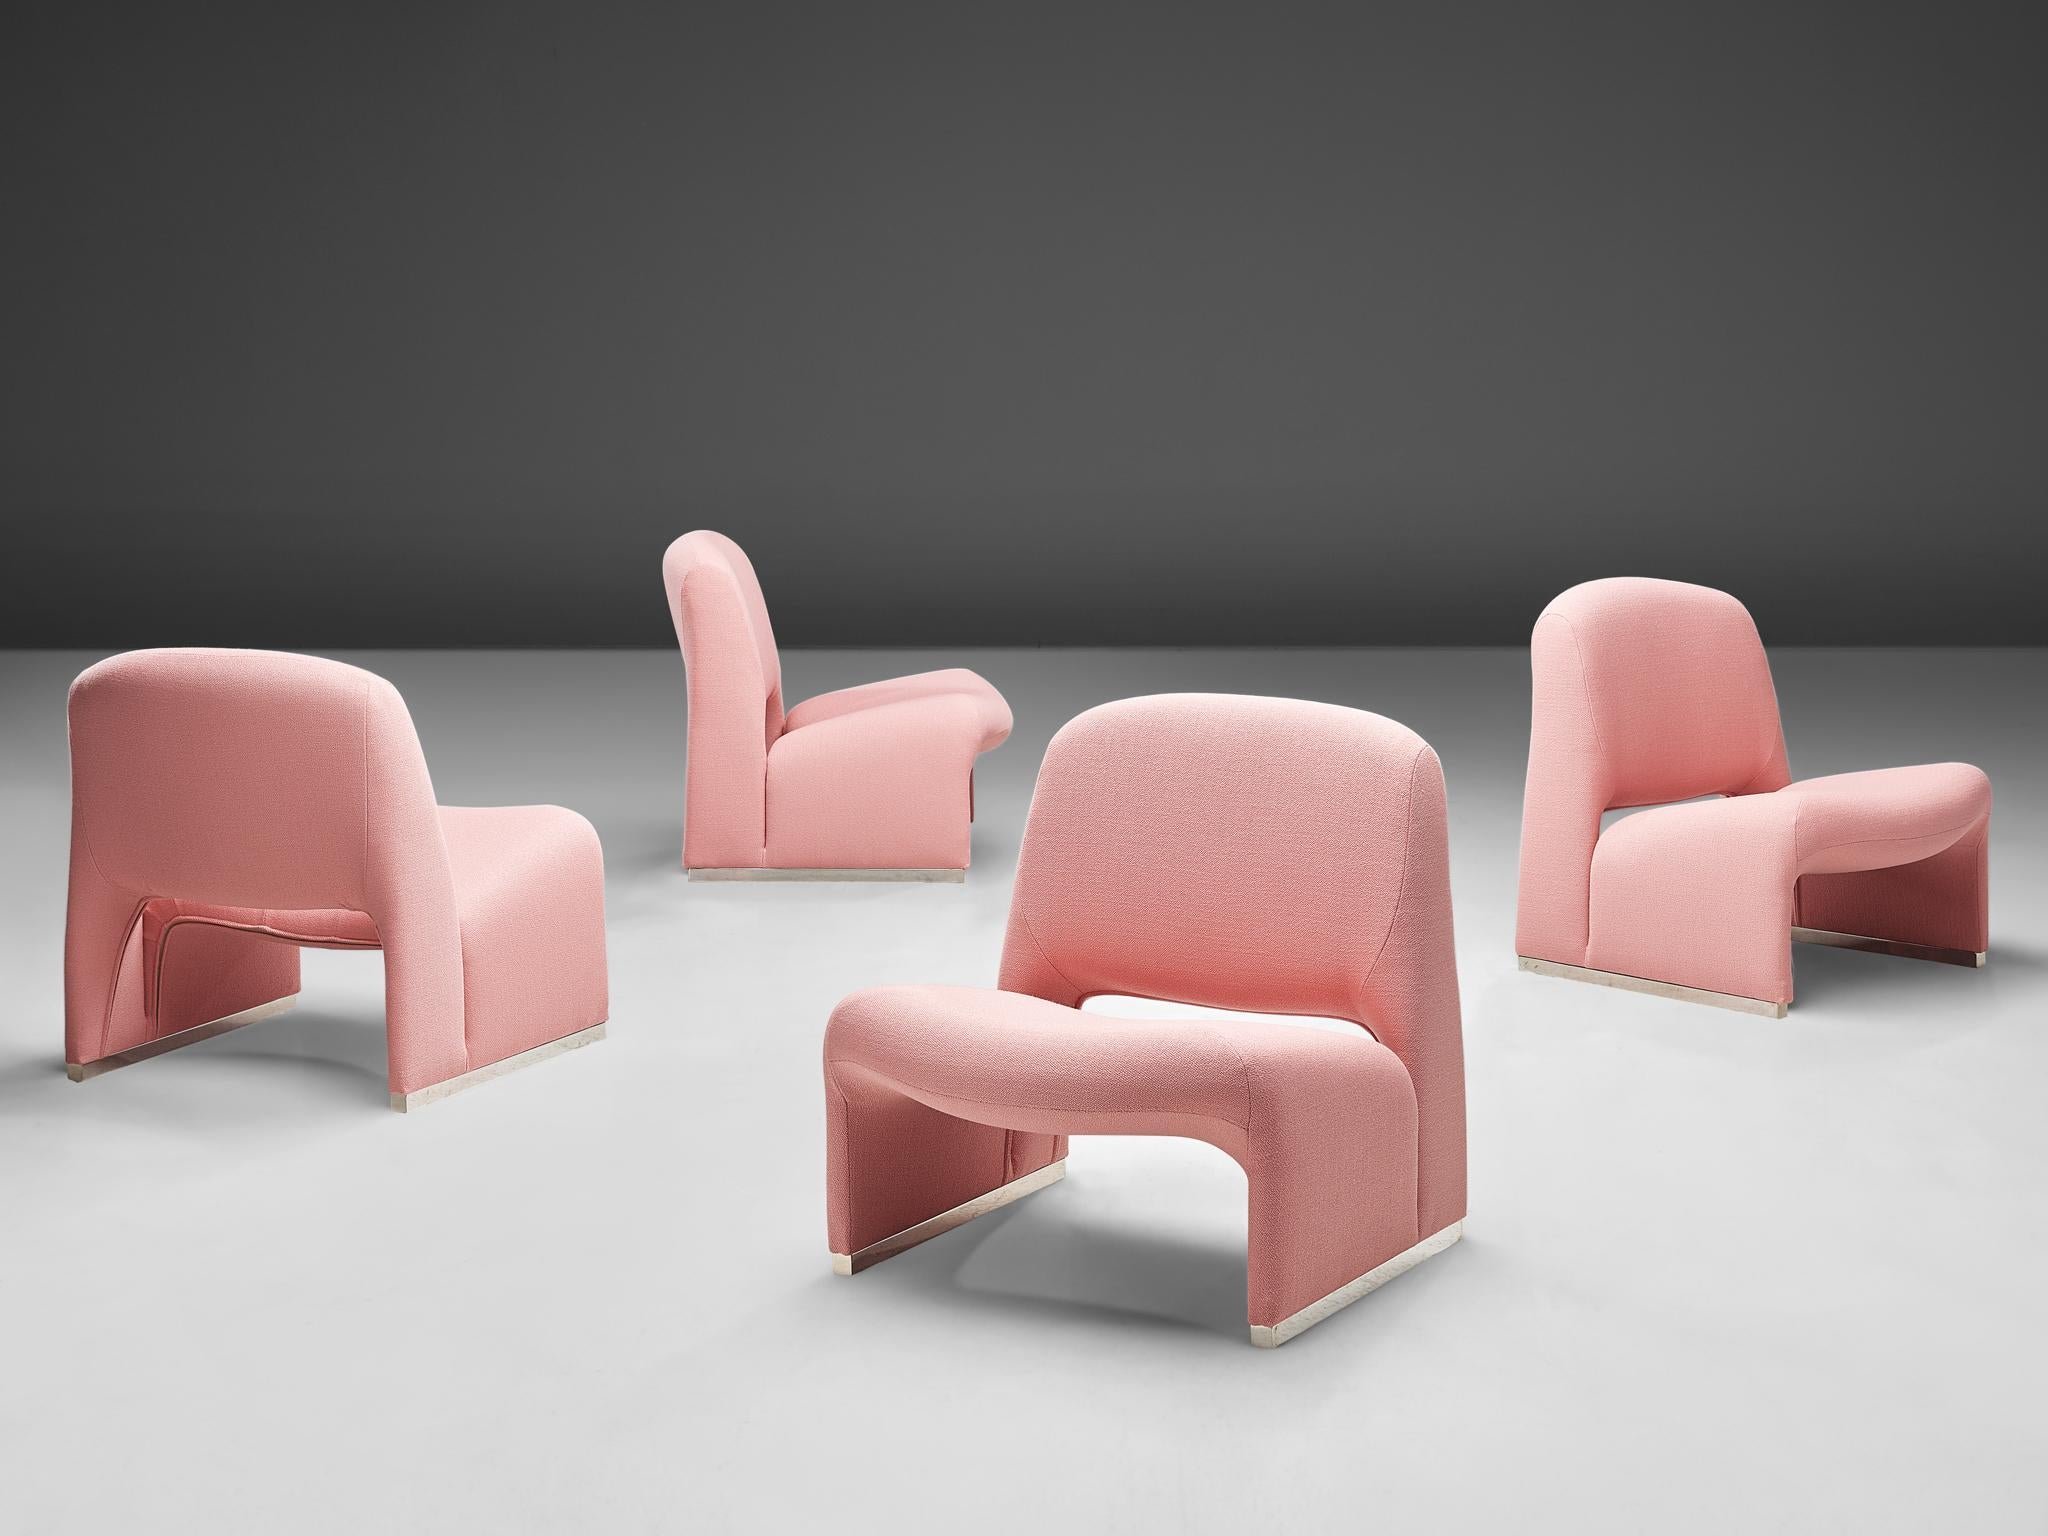 Large set of easy chairs, metal and pink fabric, Italy, 1970s

A wonderful Postmodern easy chair with bulky, fluid shapes. It consists of two curved parts that form together the legs, the seat and the backrest.  The legs are finished with an